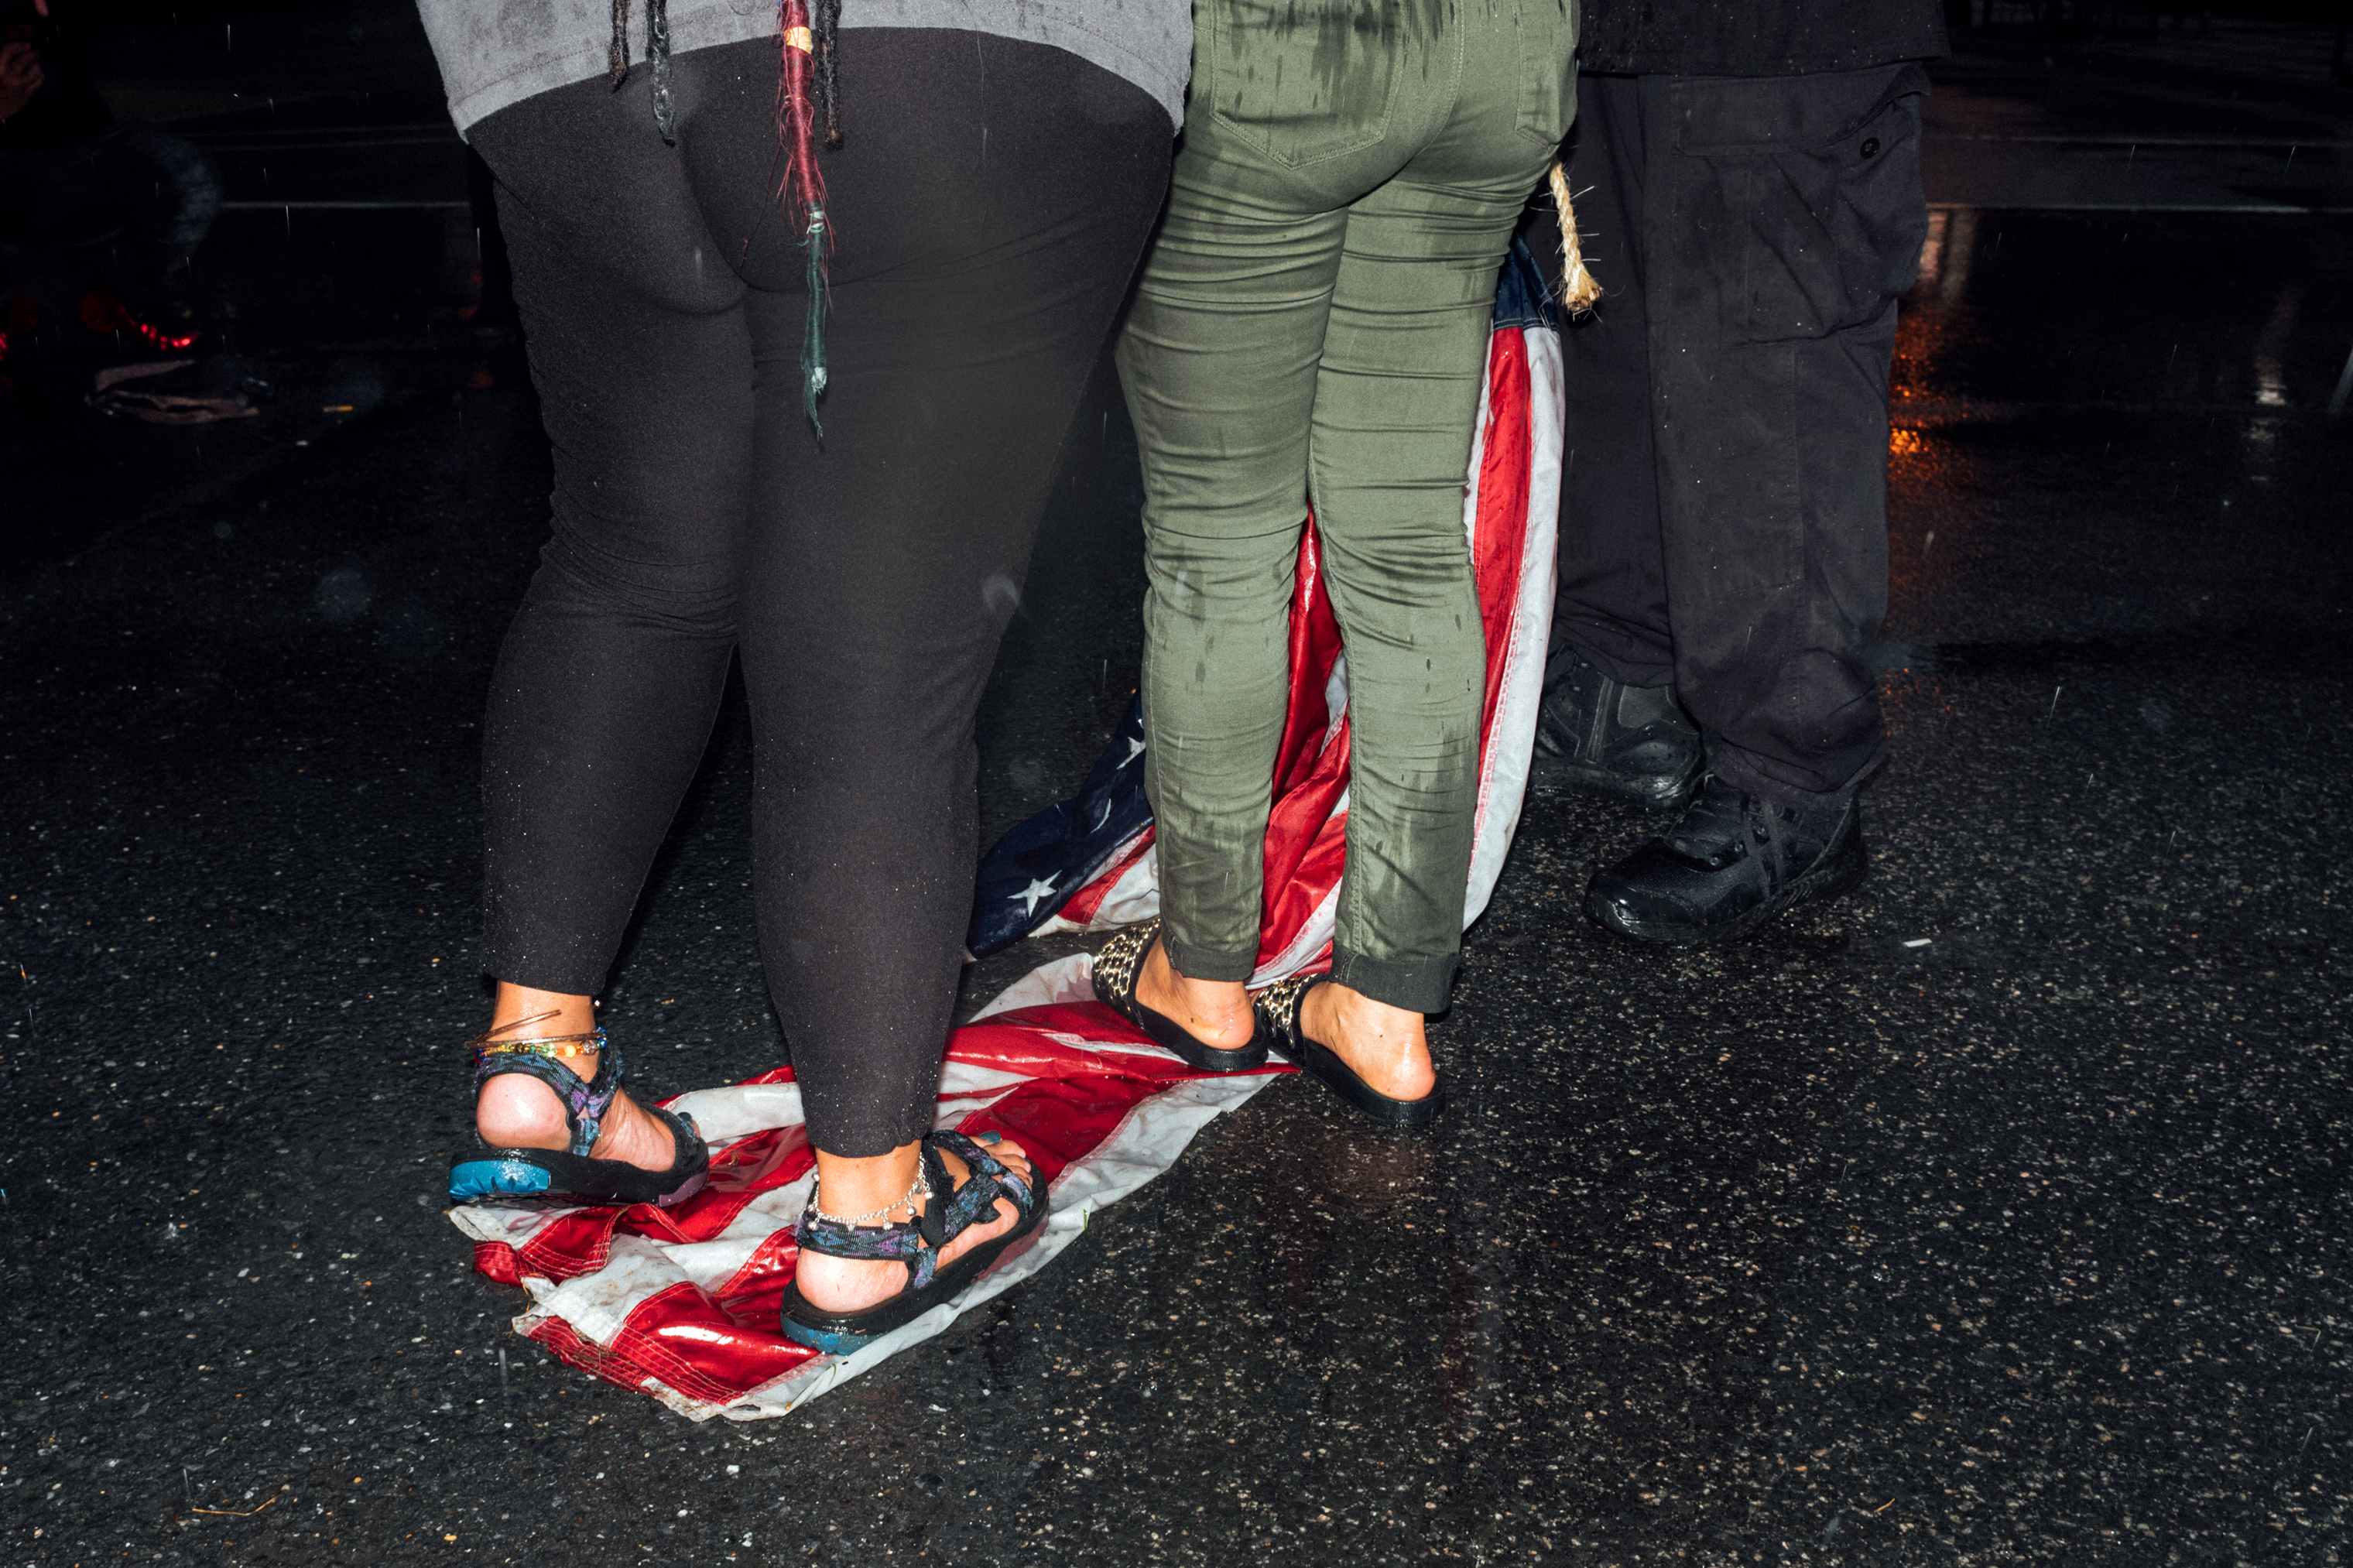 Two women stand on an American flag that throughout the day had been hung at various locations by a man aiming to call attention to racial injustices. (Daniel Arnold for TIME)